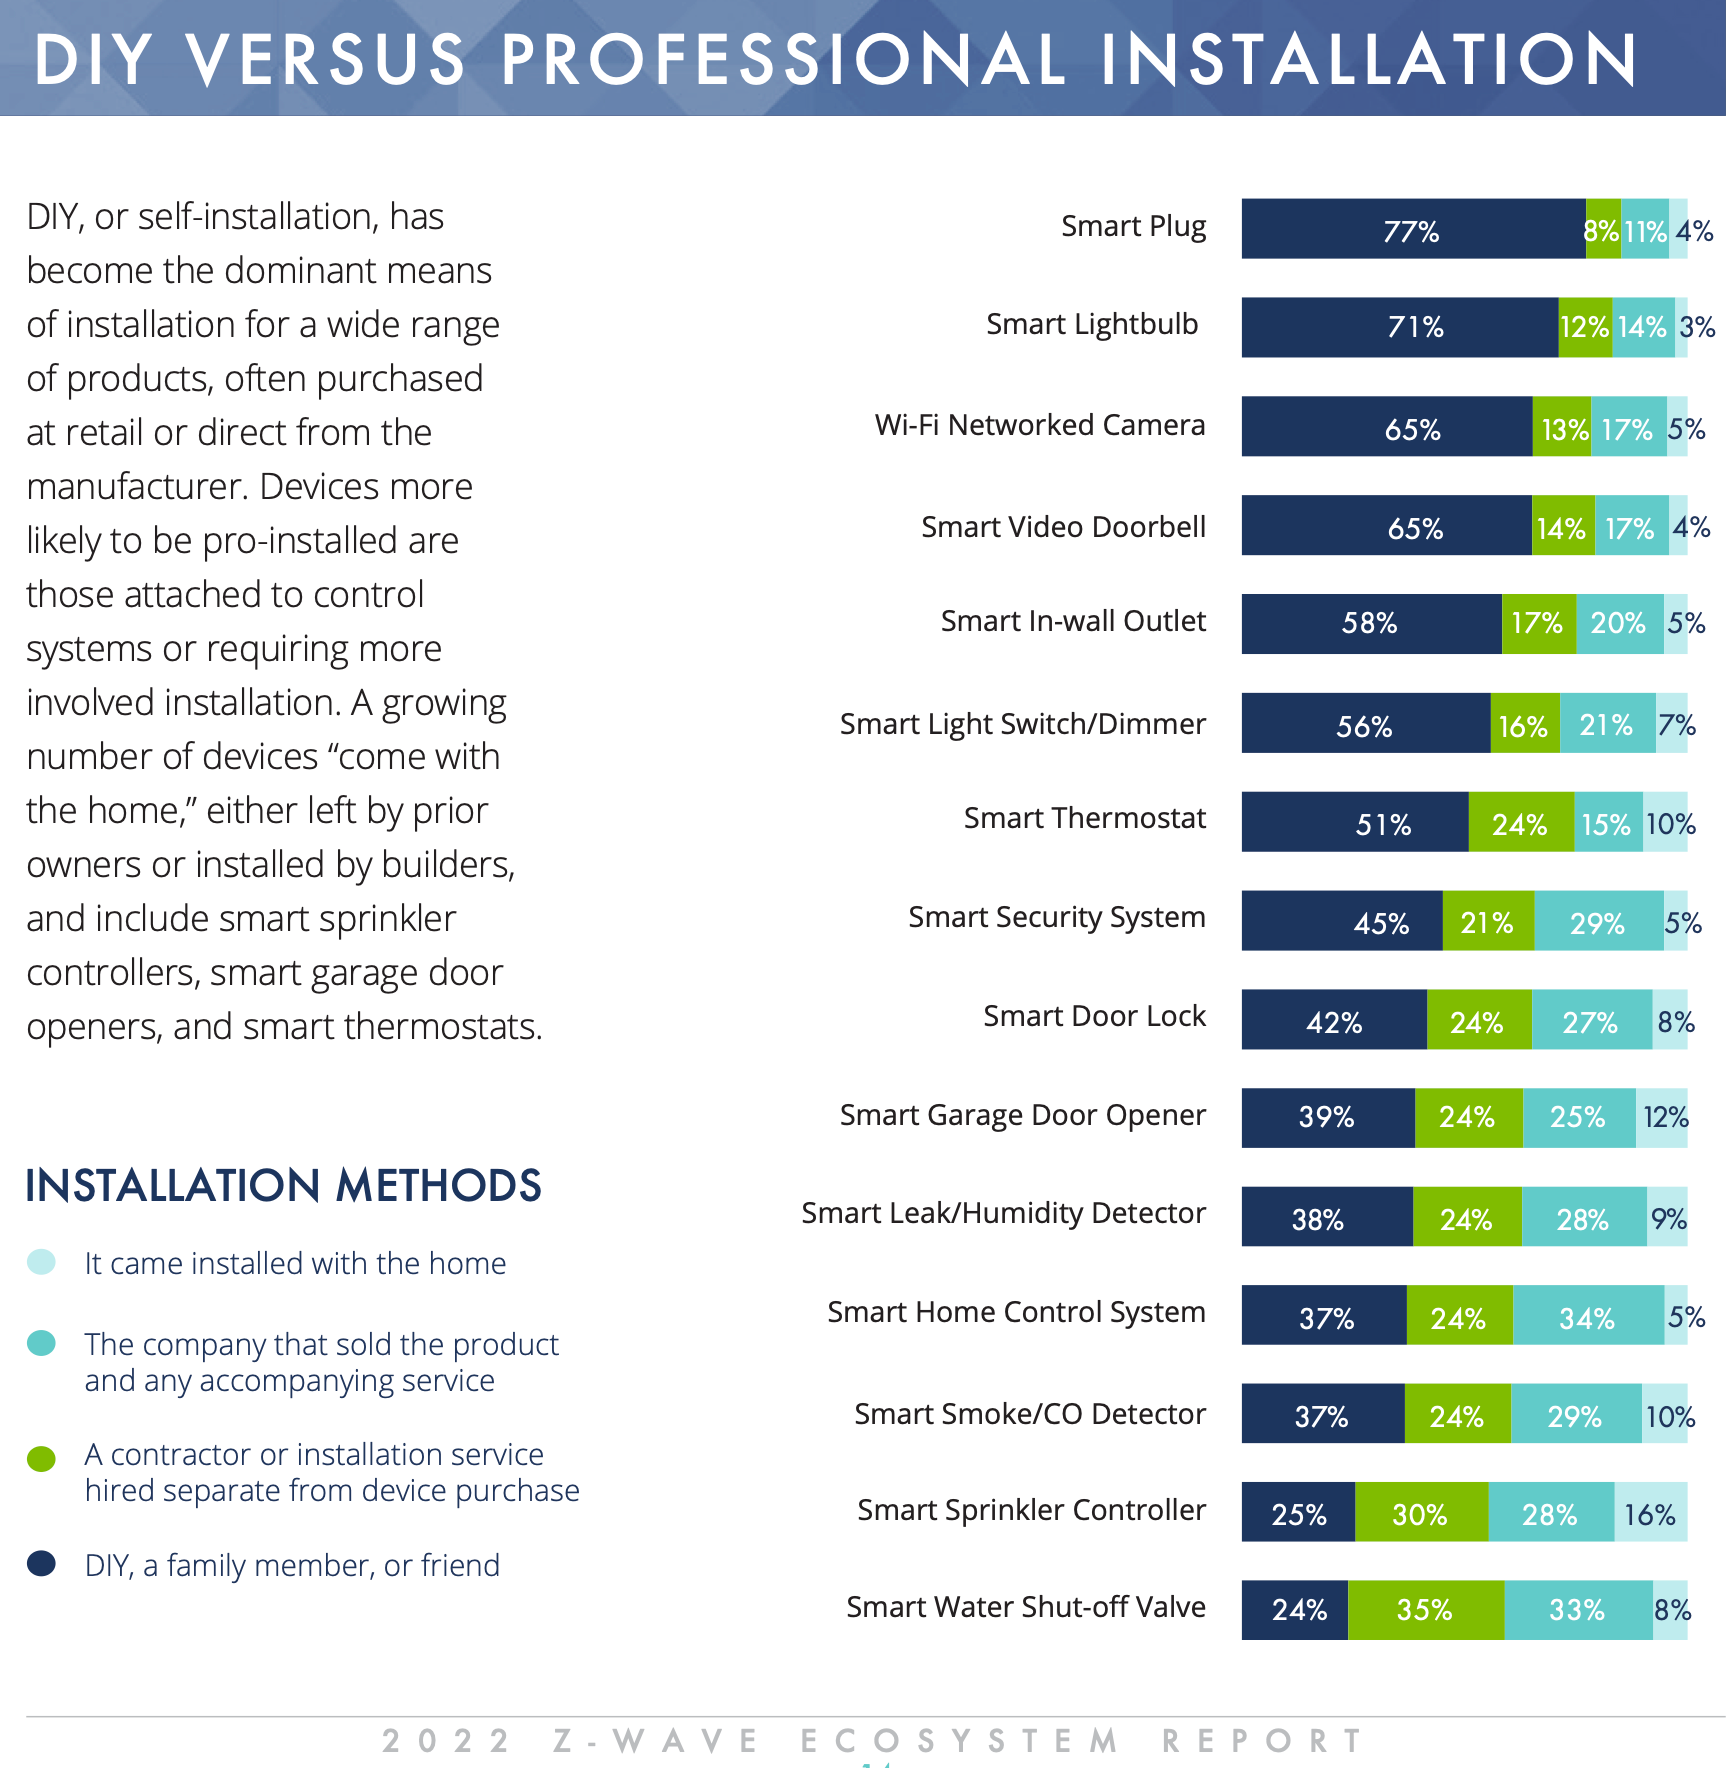 An analysis and a bar chart showing the rate of DIY and professional installation with various smart home tech devices